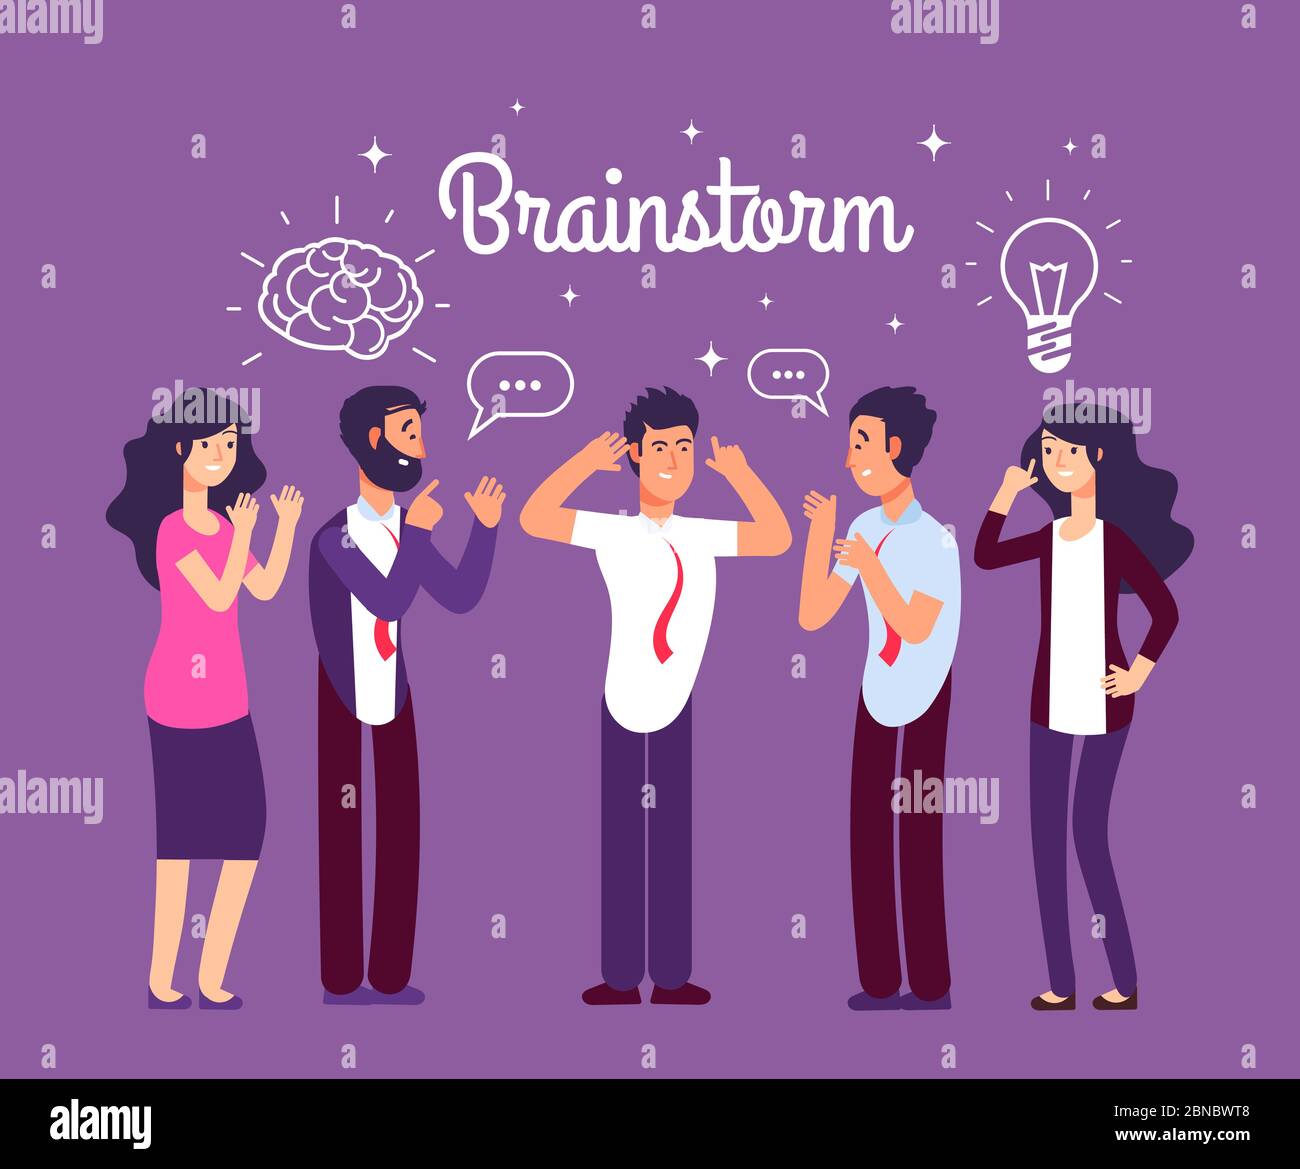 Brainstorming people. Man and woman talking and thinking. Team generates creative idea. Business meeting vector concept. Illustration of business team meeting, office group teamwork communication Stock Vector